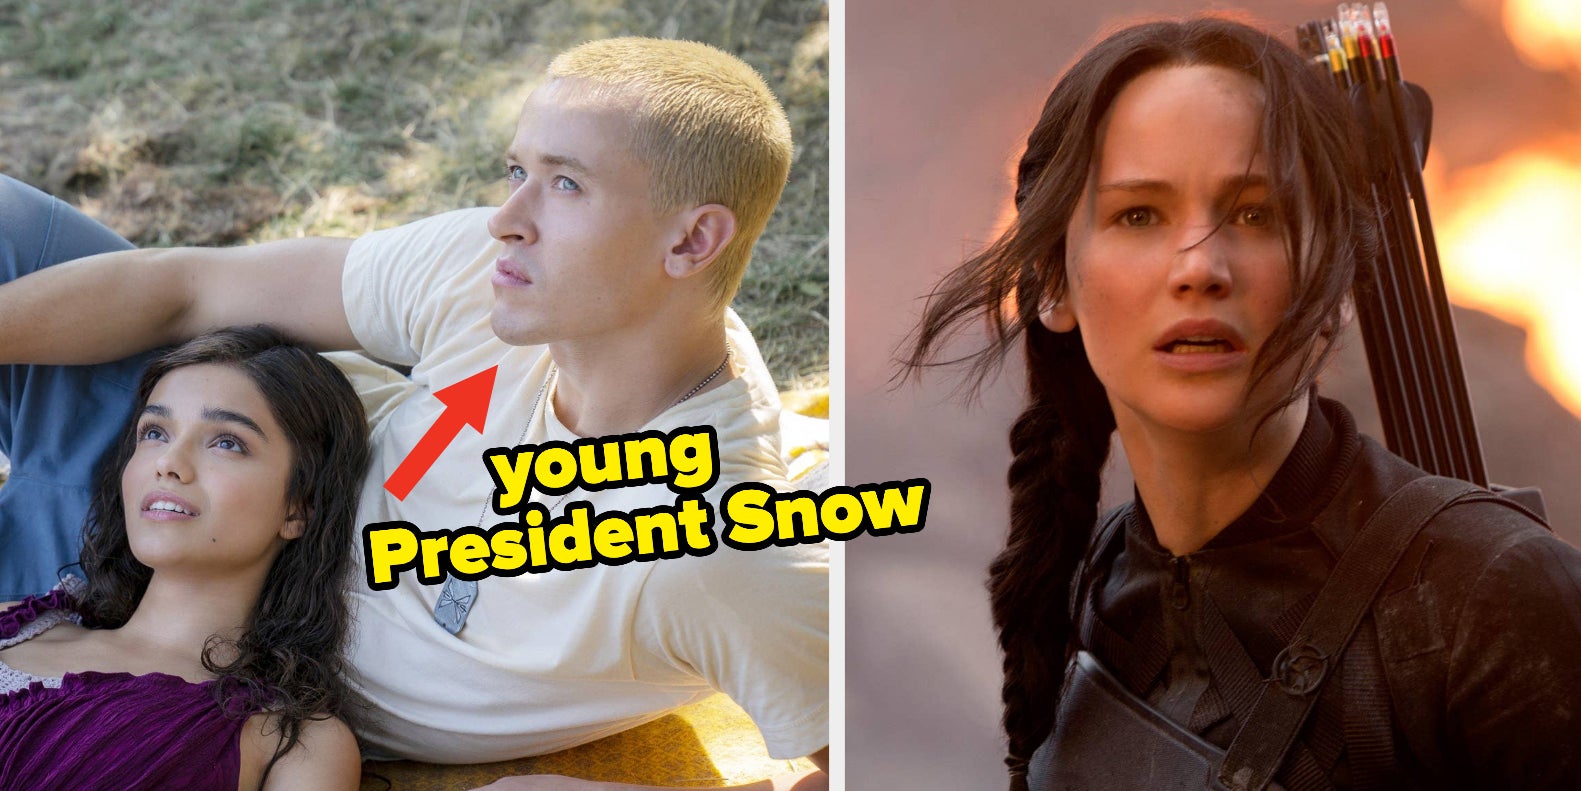 Here's How You Can Watch All Of The Hunger Games Movies